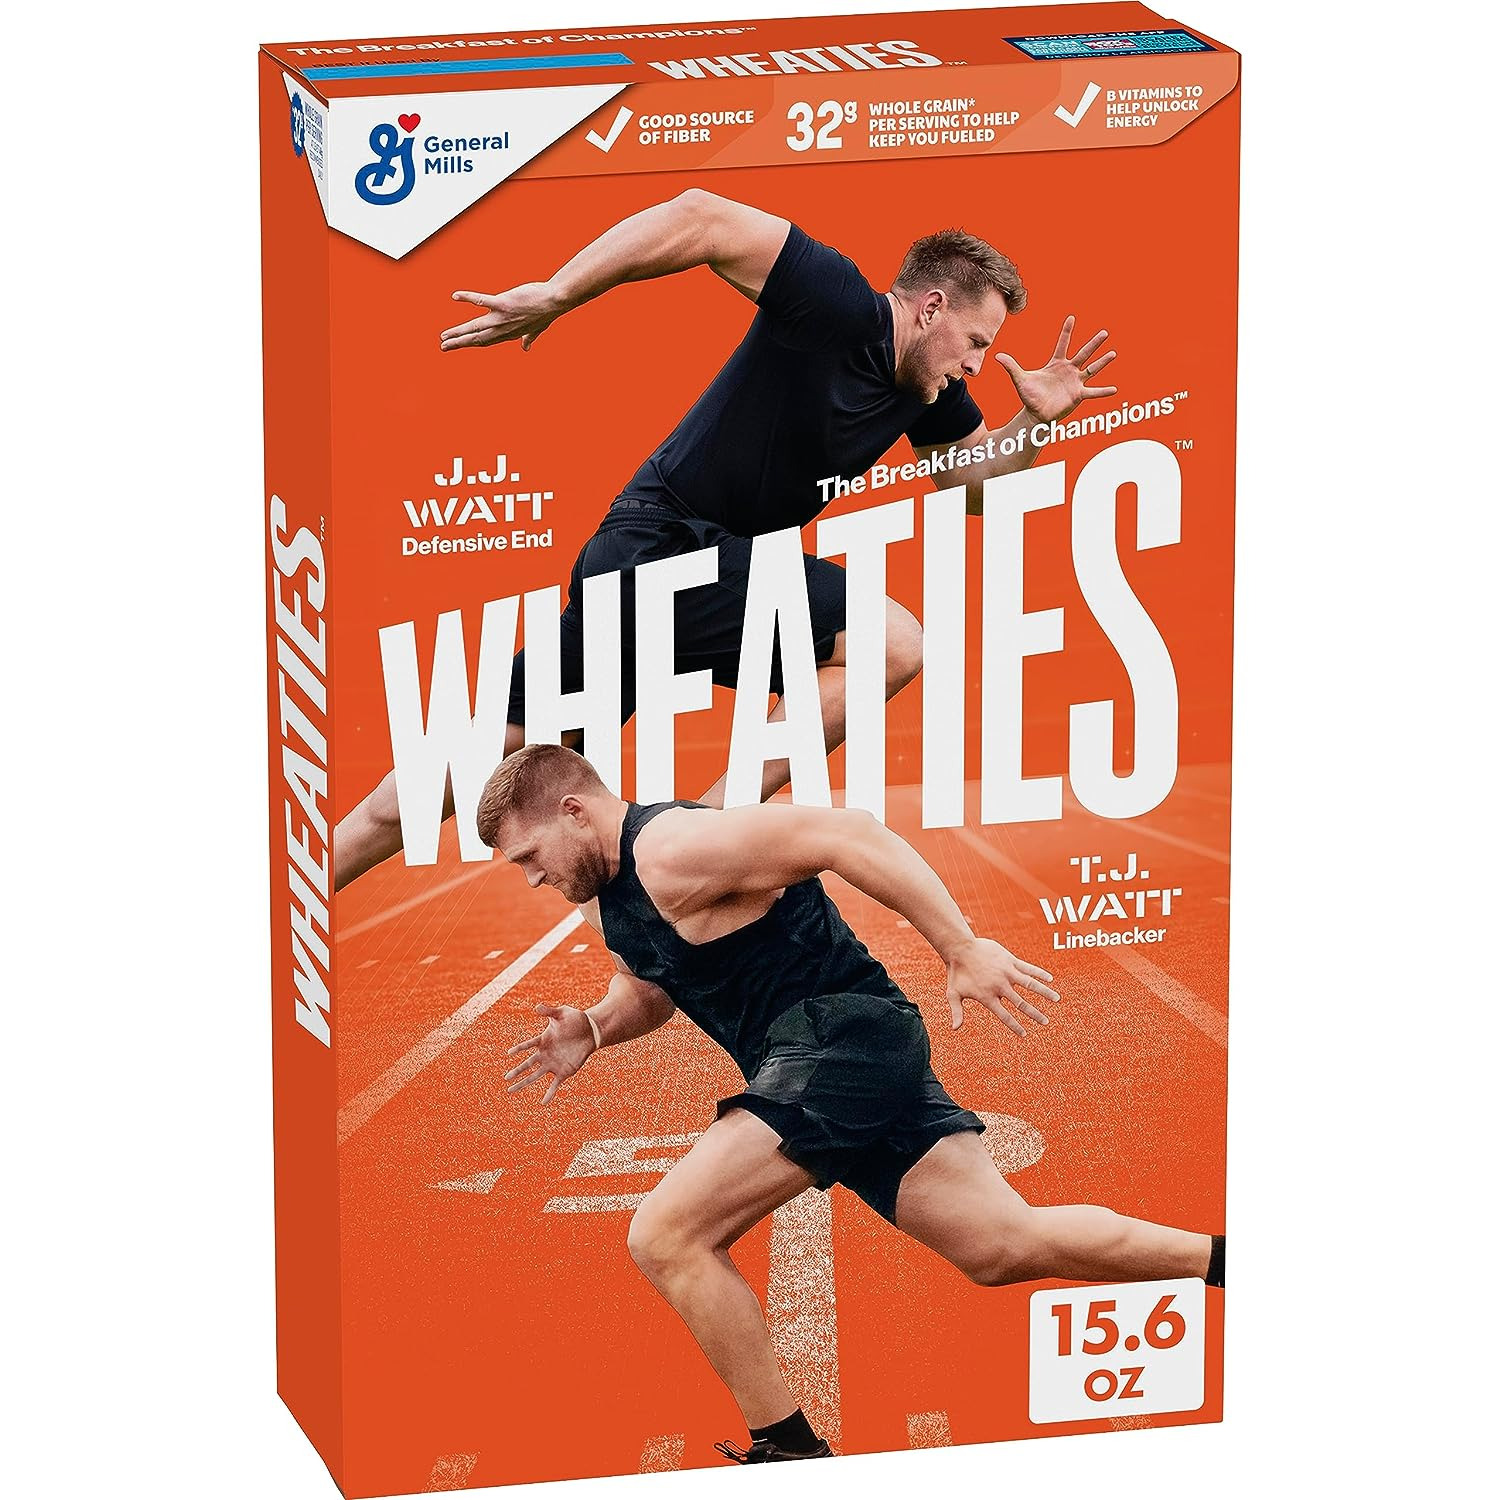 Breakfast Cereal, Breakfast of Champions, 100% Whole Wheat Flakes, 15.6 Oz